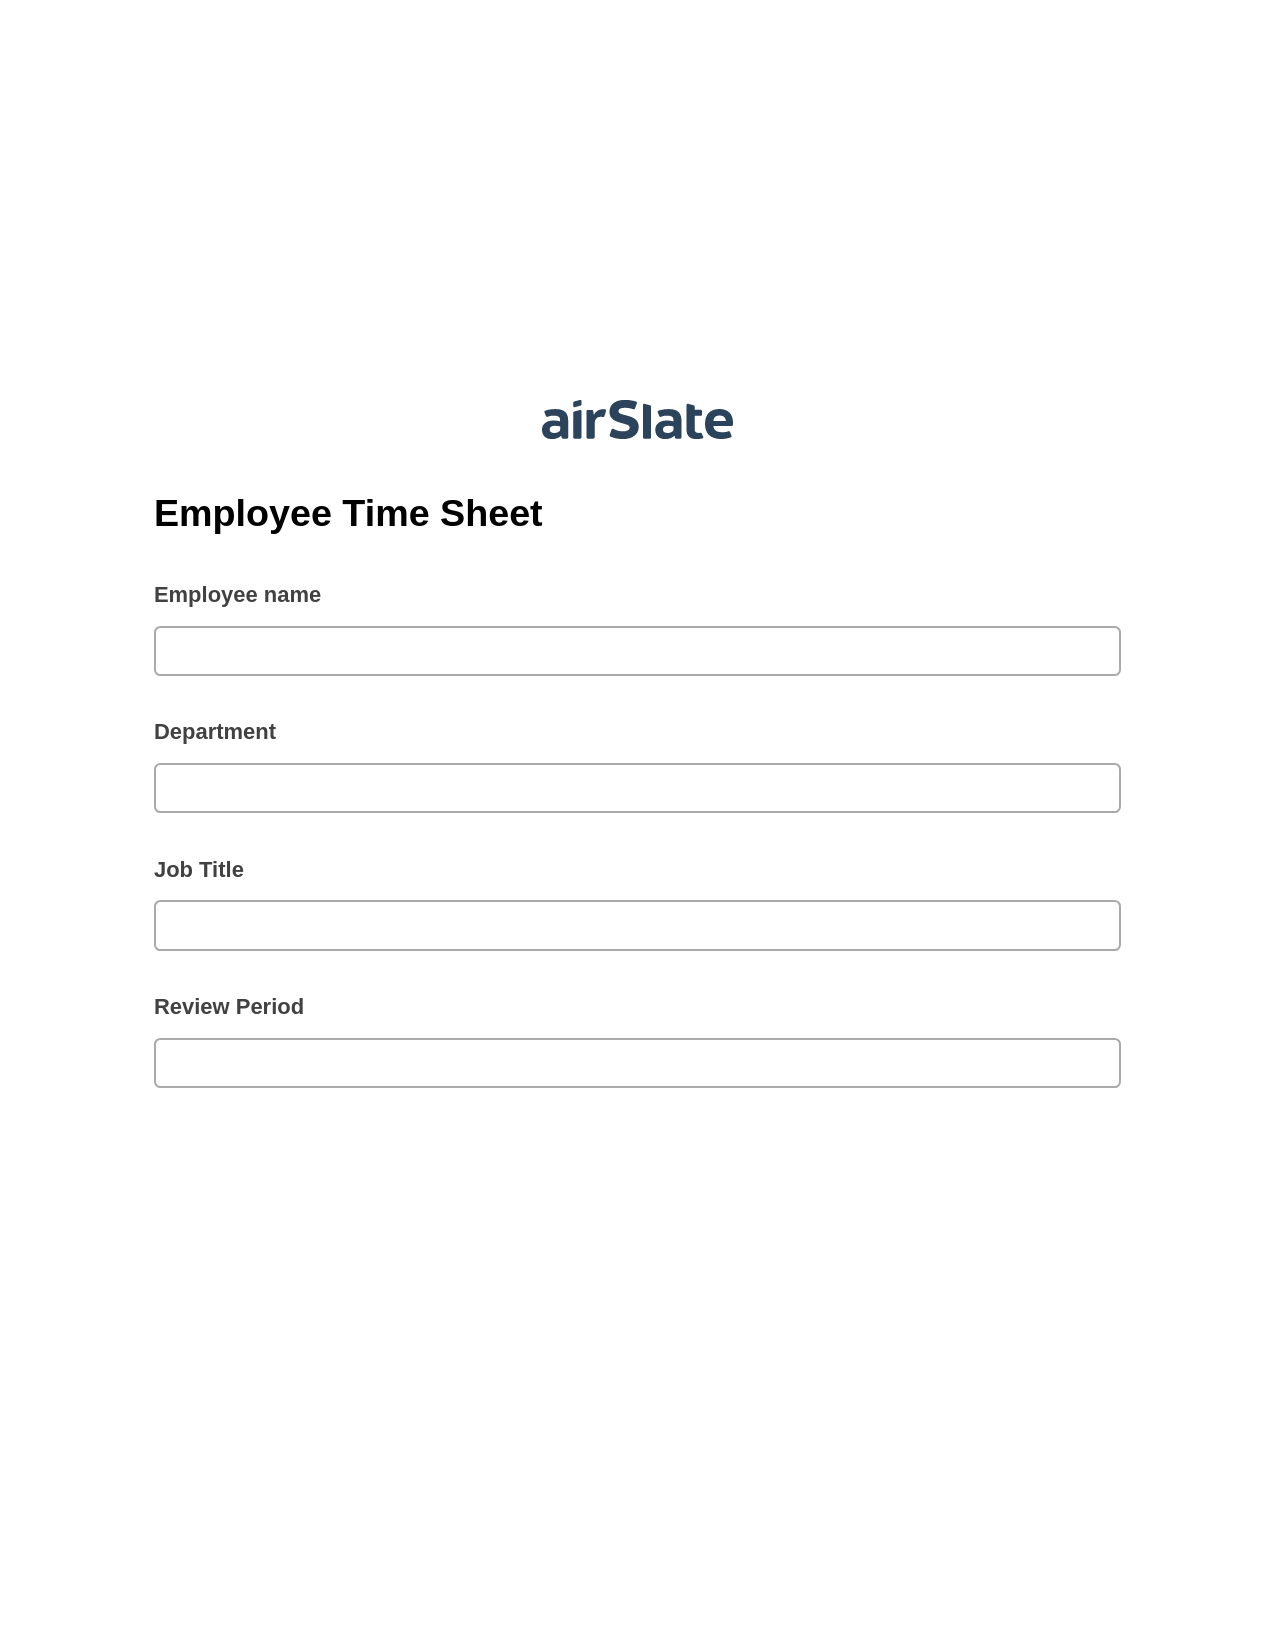 Employee Time Sheet Pre-fill from Litmos bot, Update Audit Trail Bot, Export to Excel 365 Bot